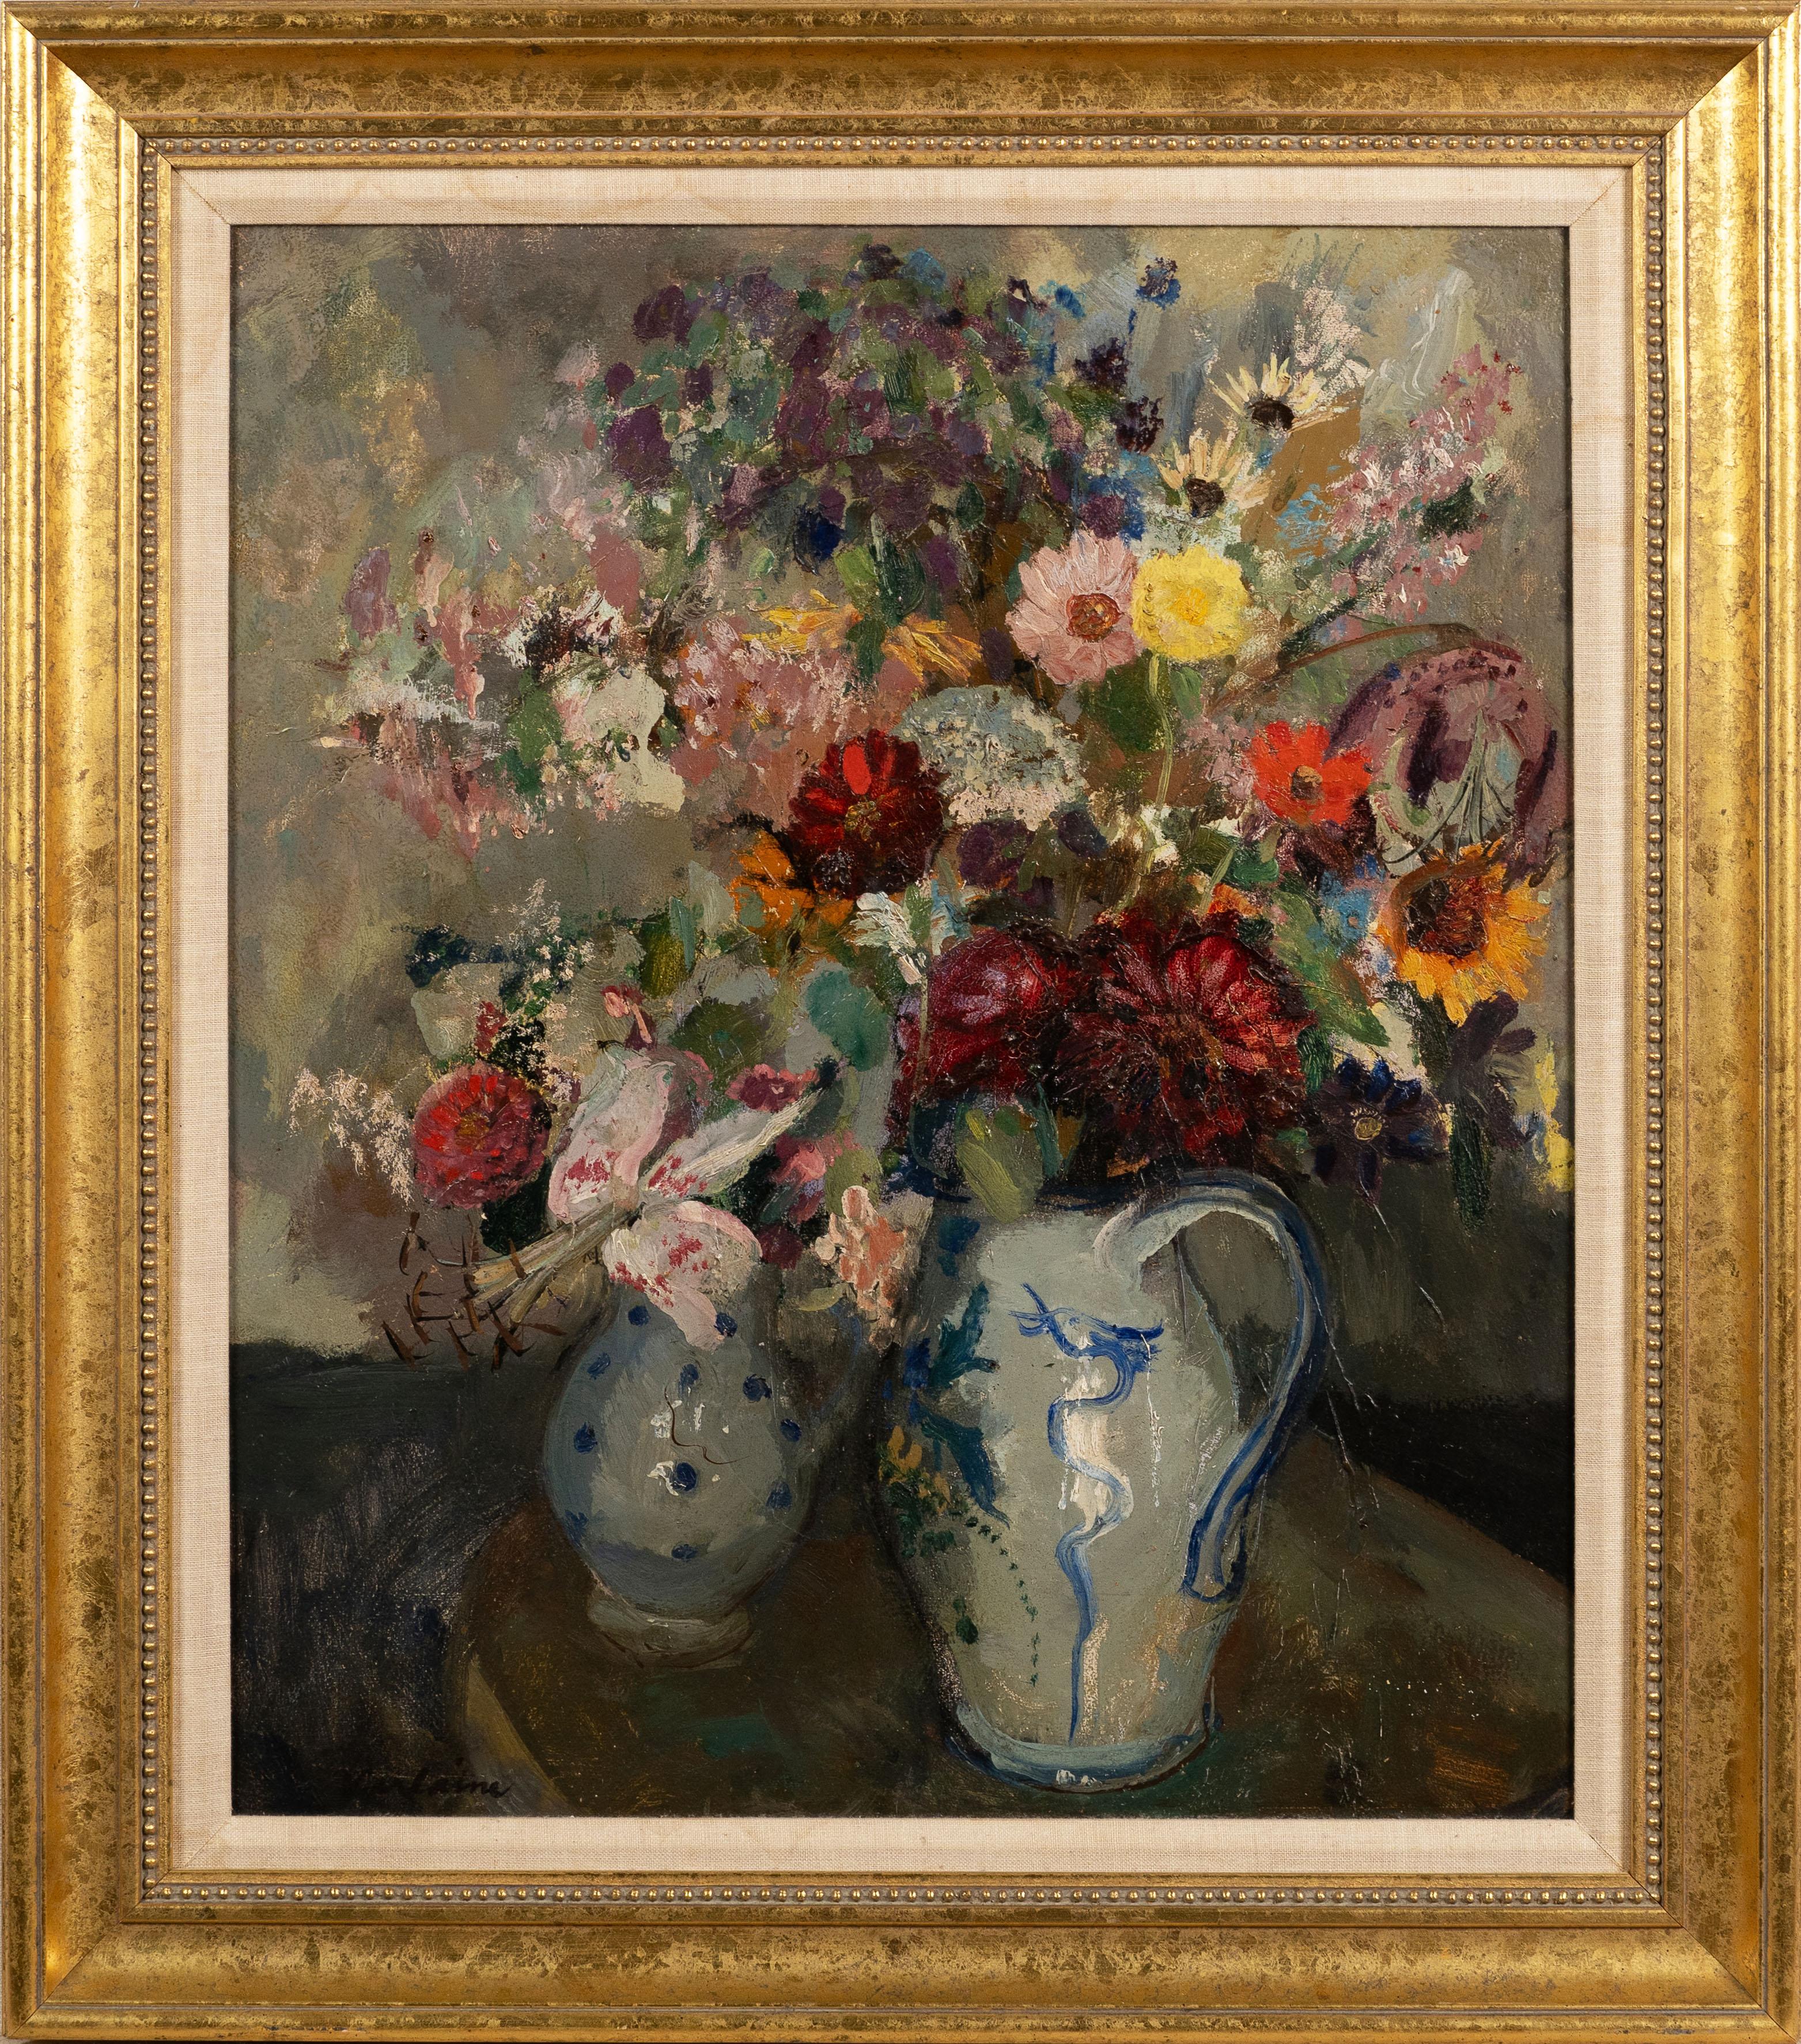 Antique American impressionist still life oil painting.  Oil on canvas.  Framed.  Signed illegibly.  Image size, 20L x 24H.